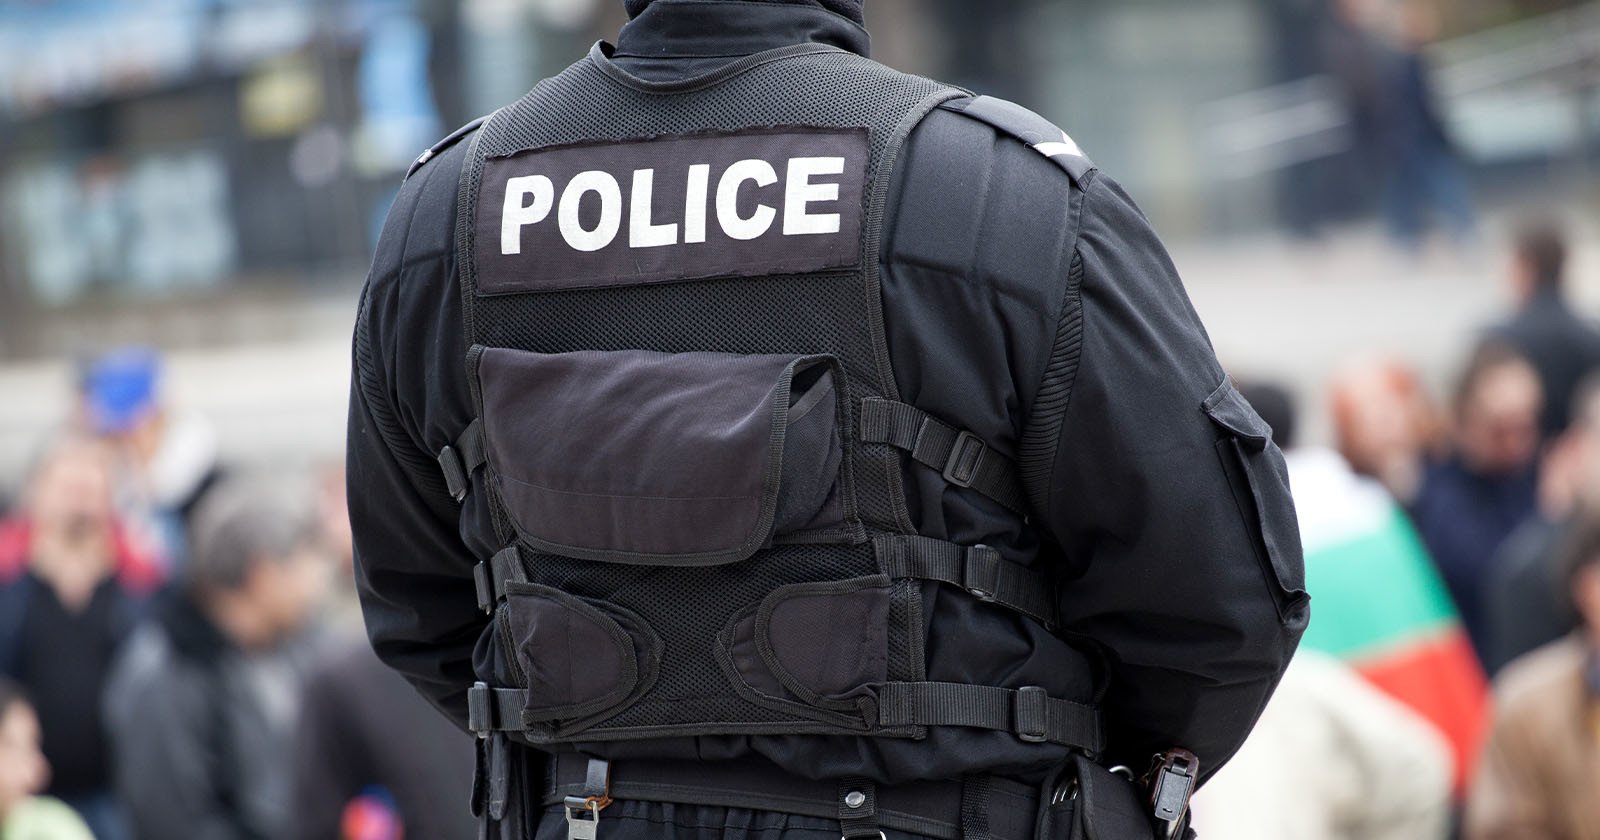 Lawsuit Challenging Law That Restricts Recording Police Has Nationwide Implications